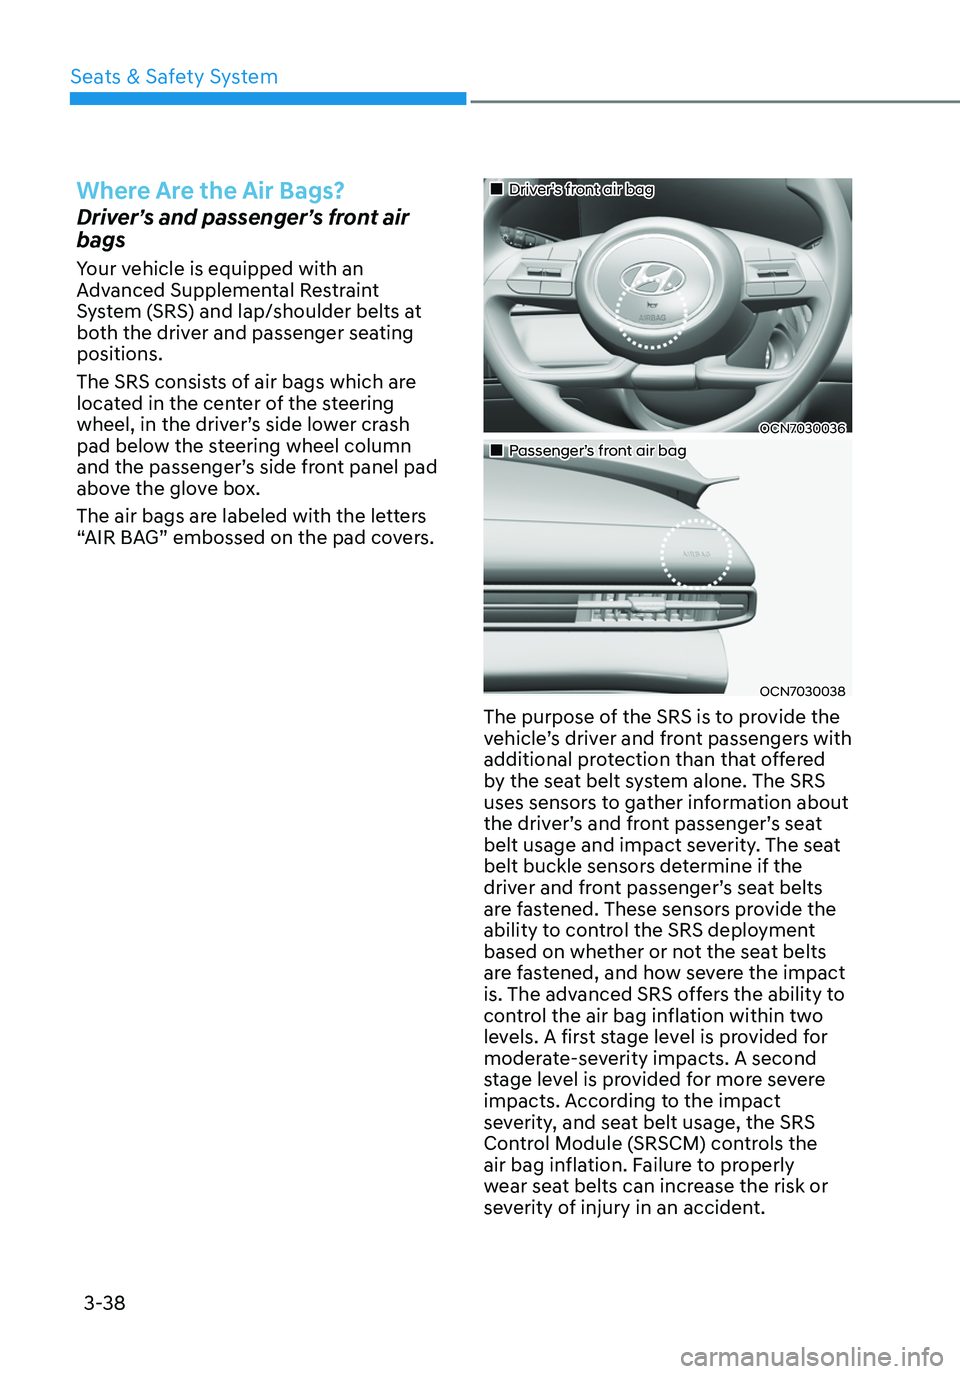 HYUNDAI ELANTRA HYBRID 2021  Owners Manual 3-38
Where Are the Air Bags?
Driver’s and passenger’s front air 
bags
Your vehicle is equipped with an 
Advanced Supplemental Restraint 
System (SRS) and lap/shoulder belts at 
both the driver and